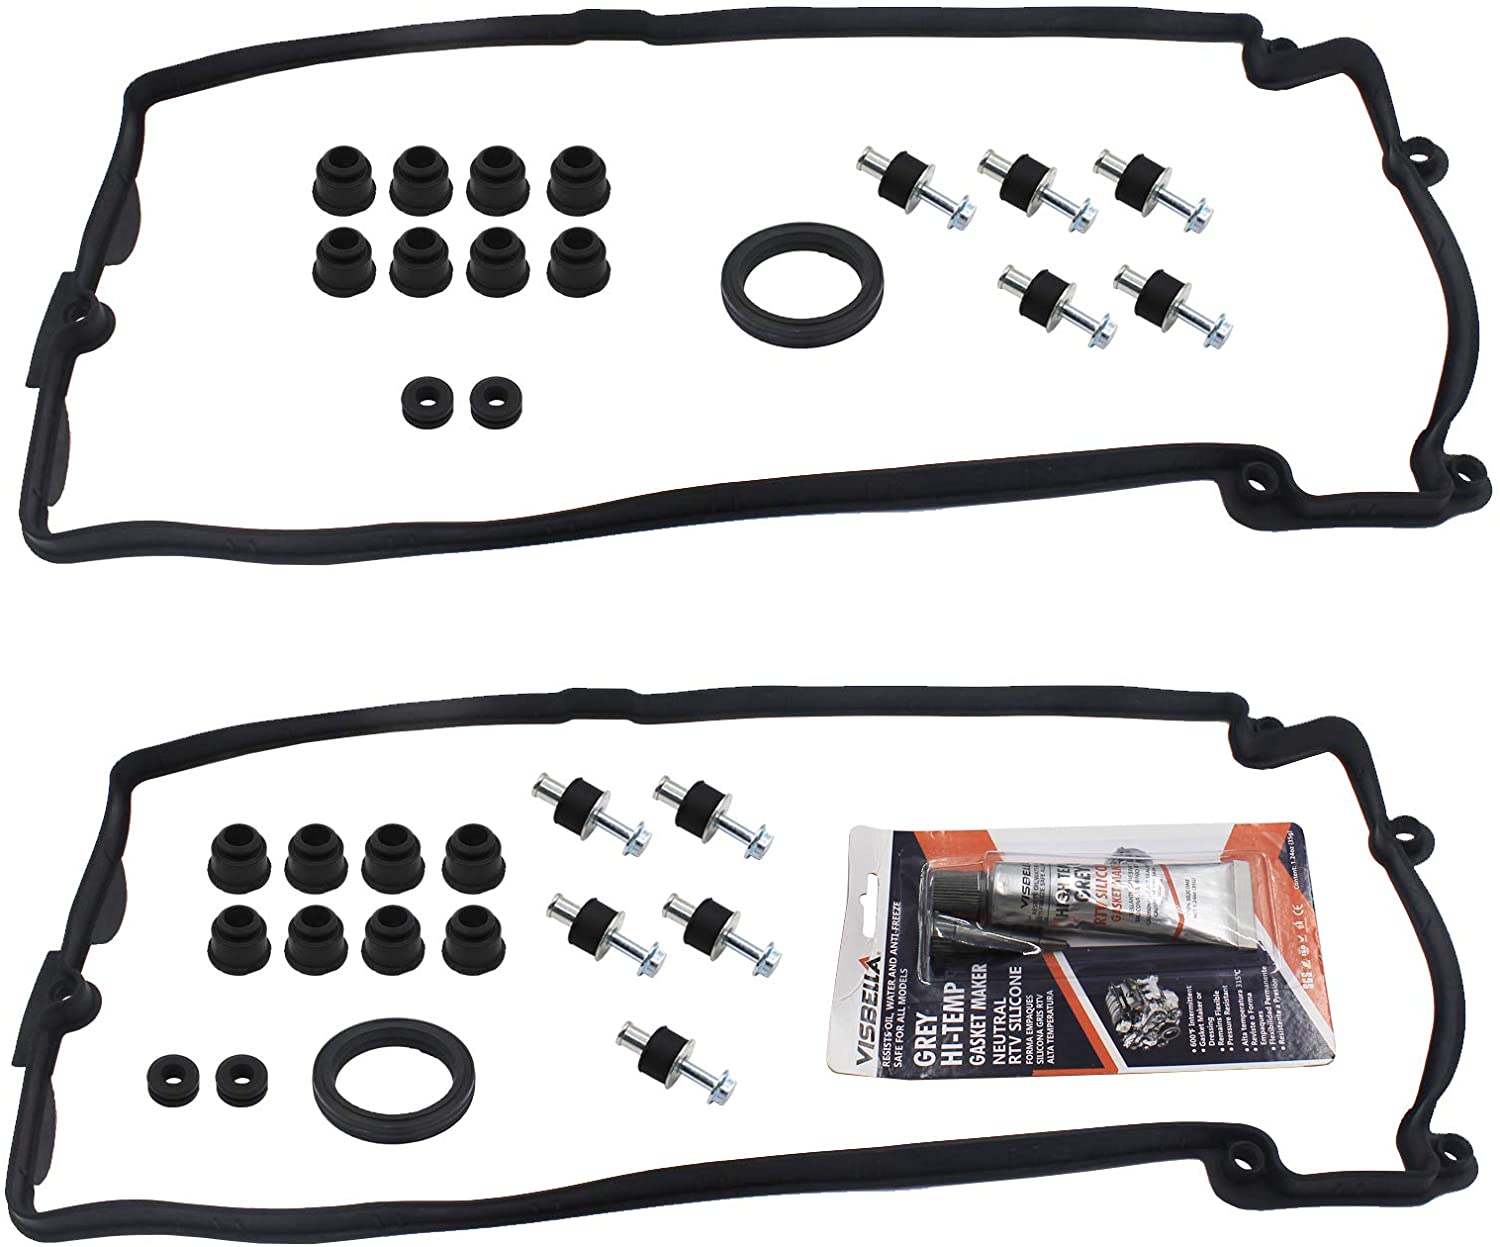 Engine Valve Cover Gaskets Kit Left & Right Replacement for BMW 545i 550i 645Ci 650i 745Li 745i 4.8L 2002 2003 2004 2005 2006 2007 2008 2009 2010# 11127513194 11127513195 by LAFORMO